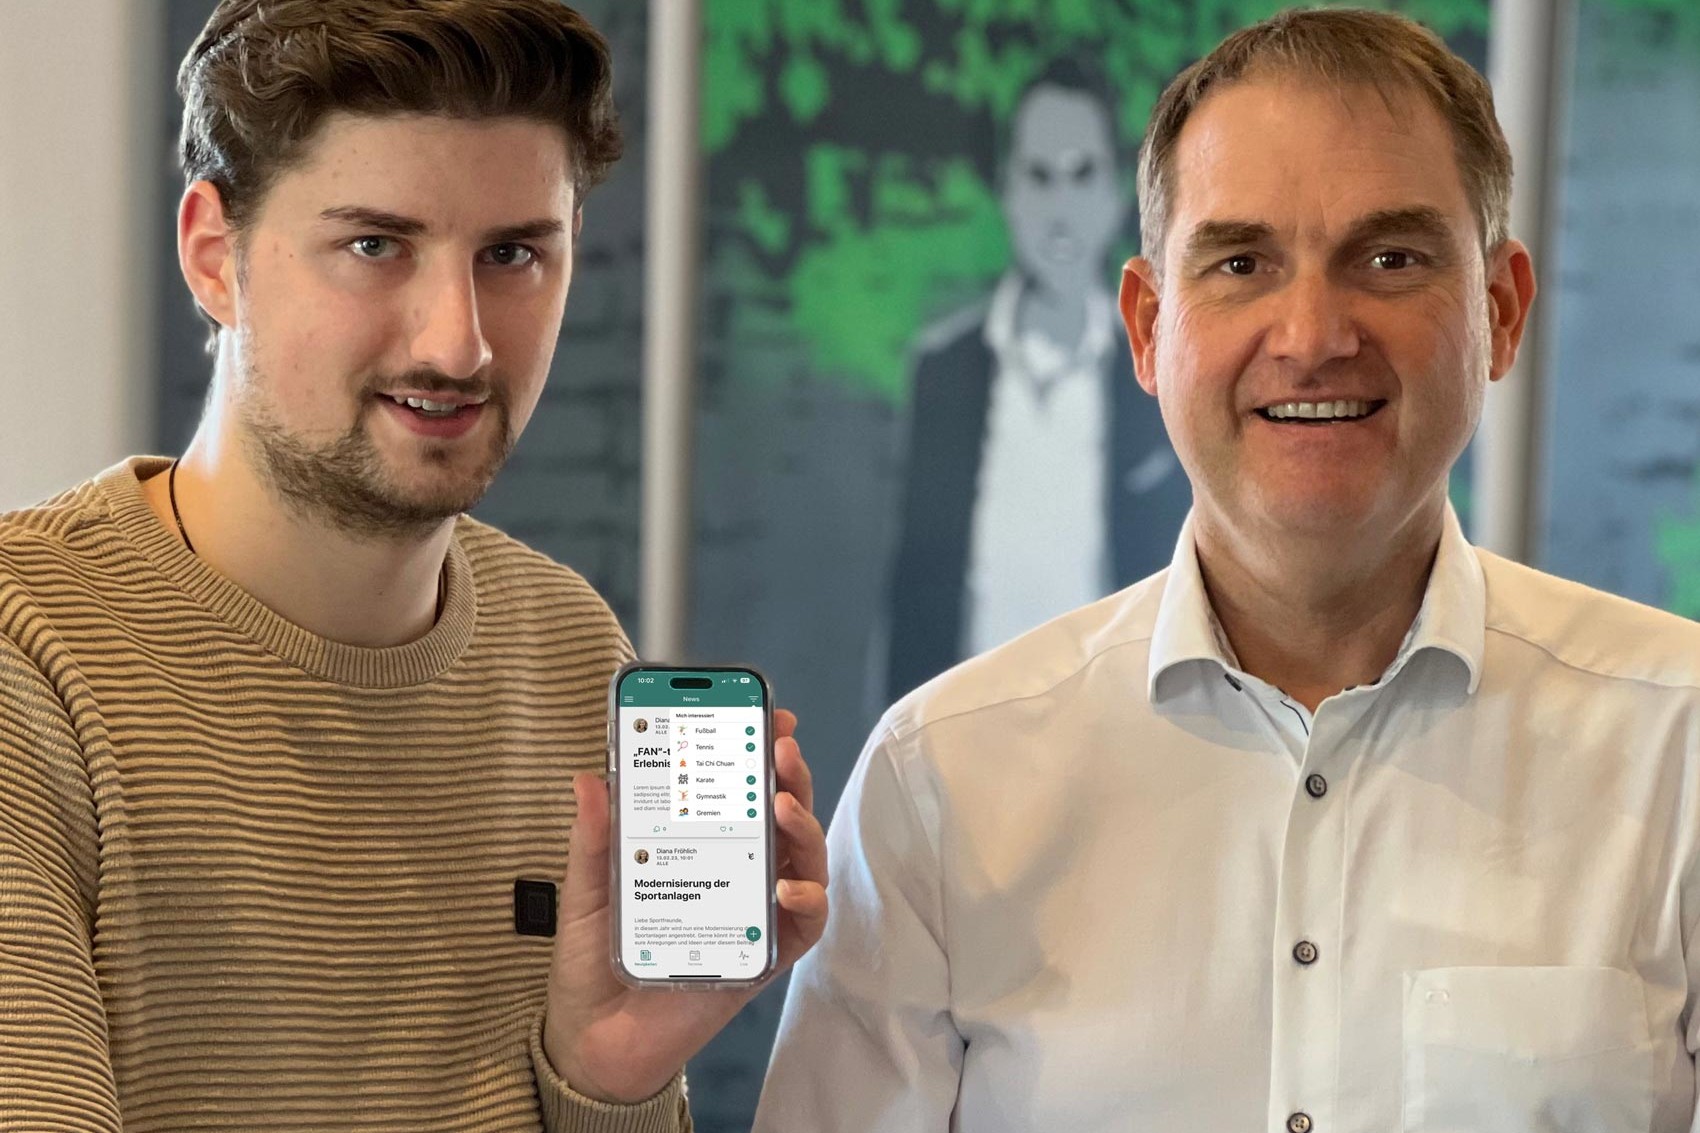 Leon Quacken (left) and Dr. Oliver Grün with GRÜN ClubHero, the app for sports clubs.